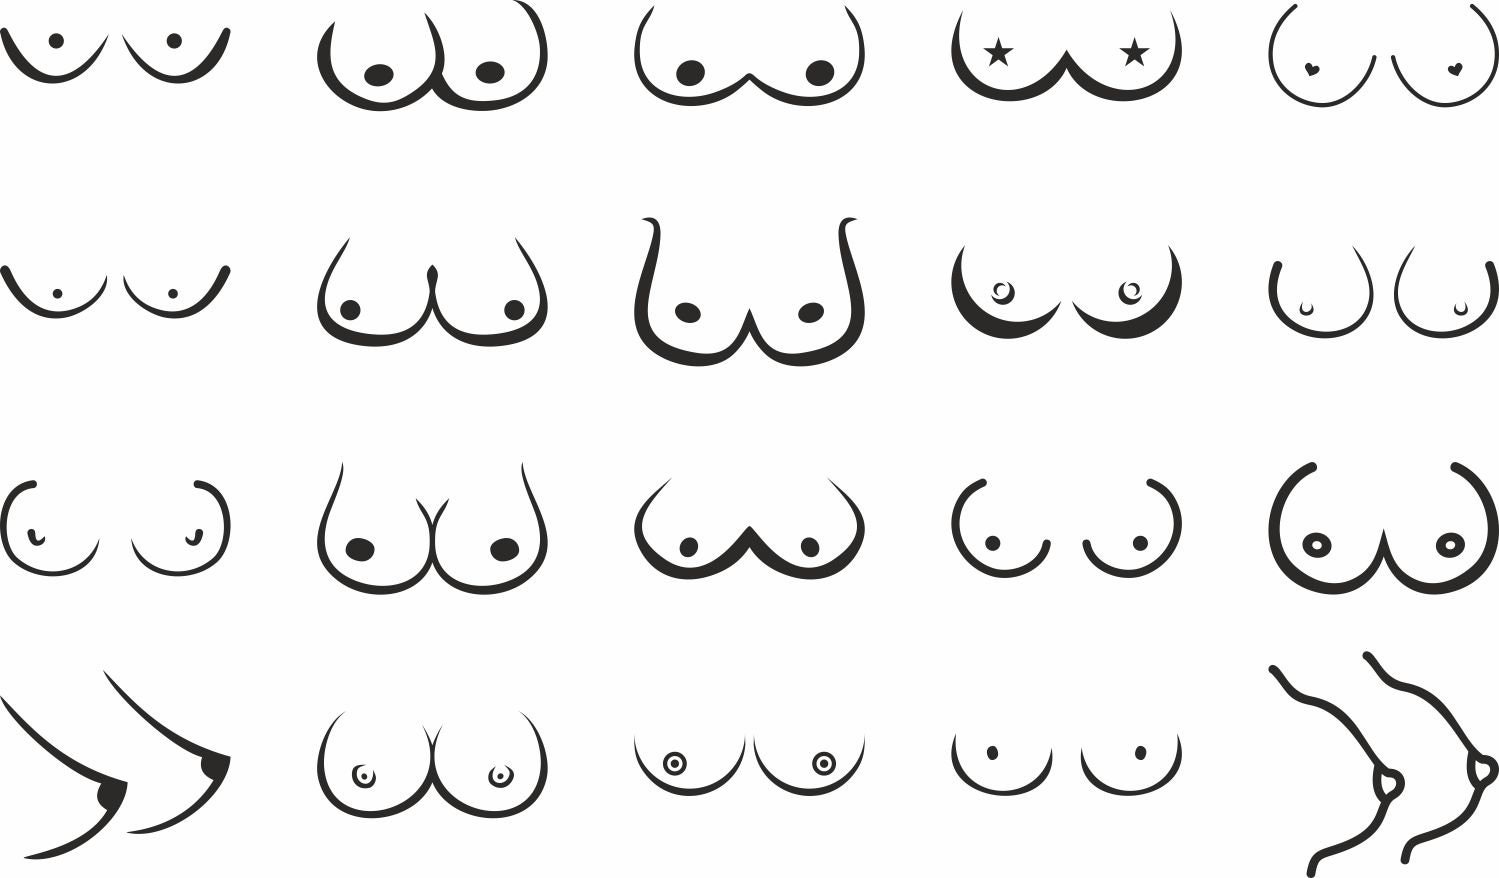 Boobs SVG Bundle, Girl Power SVG, Boobs Graphic by 99SiamVector